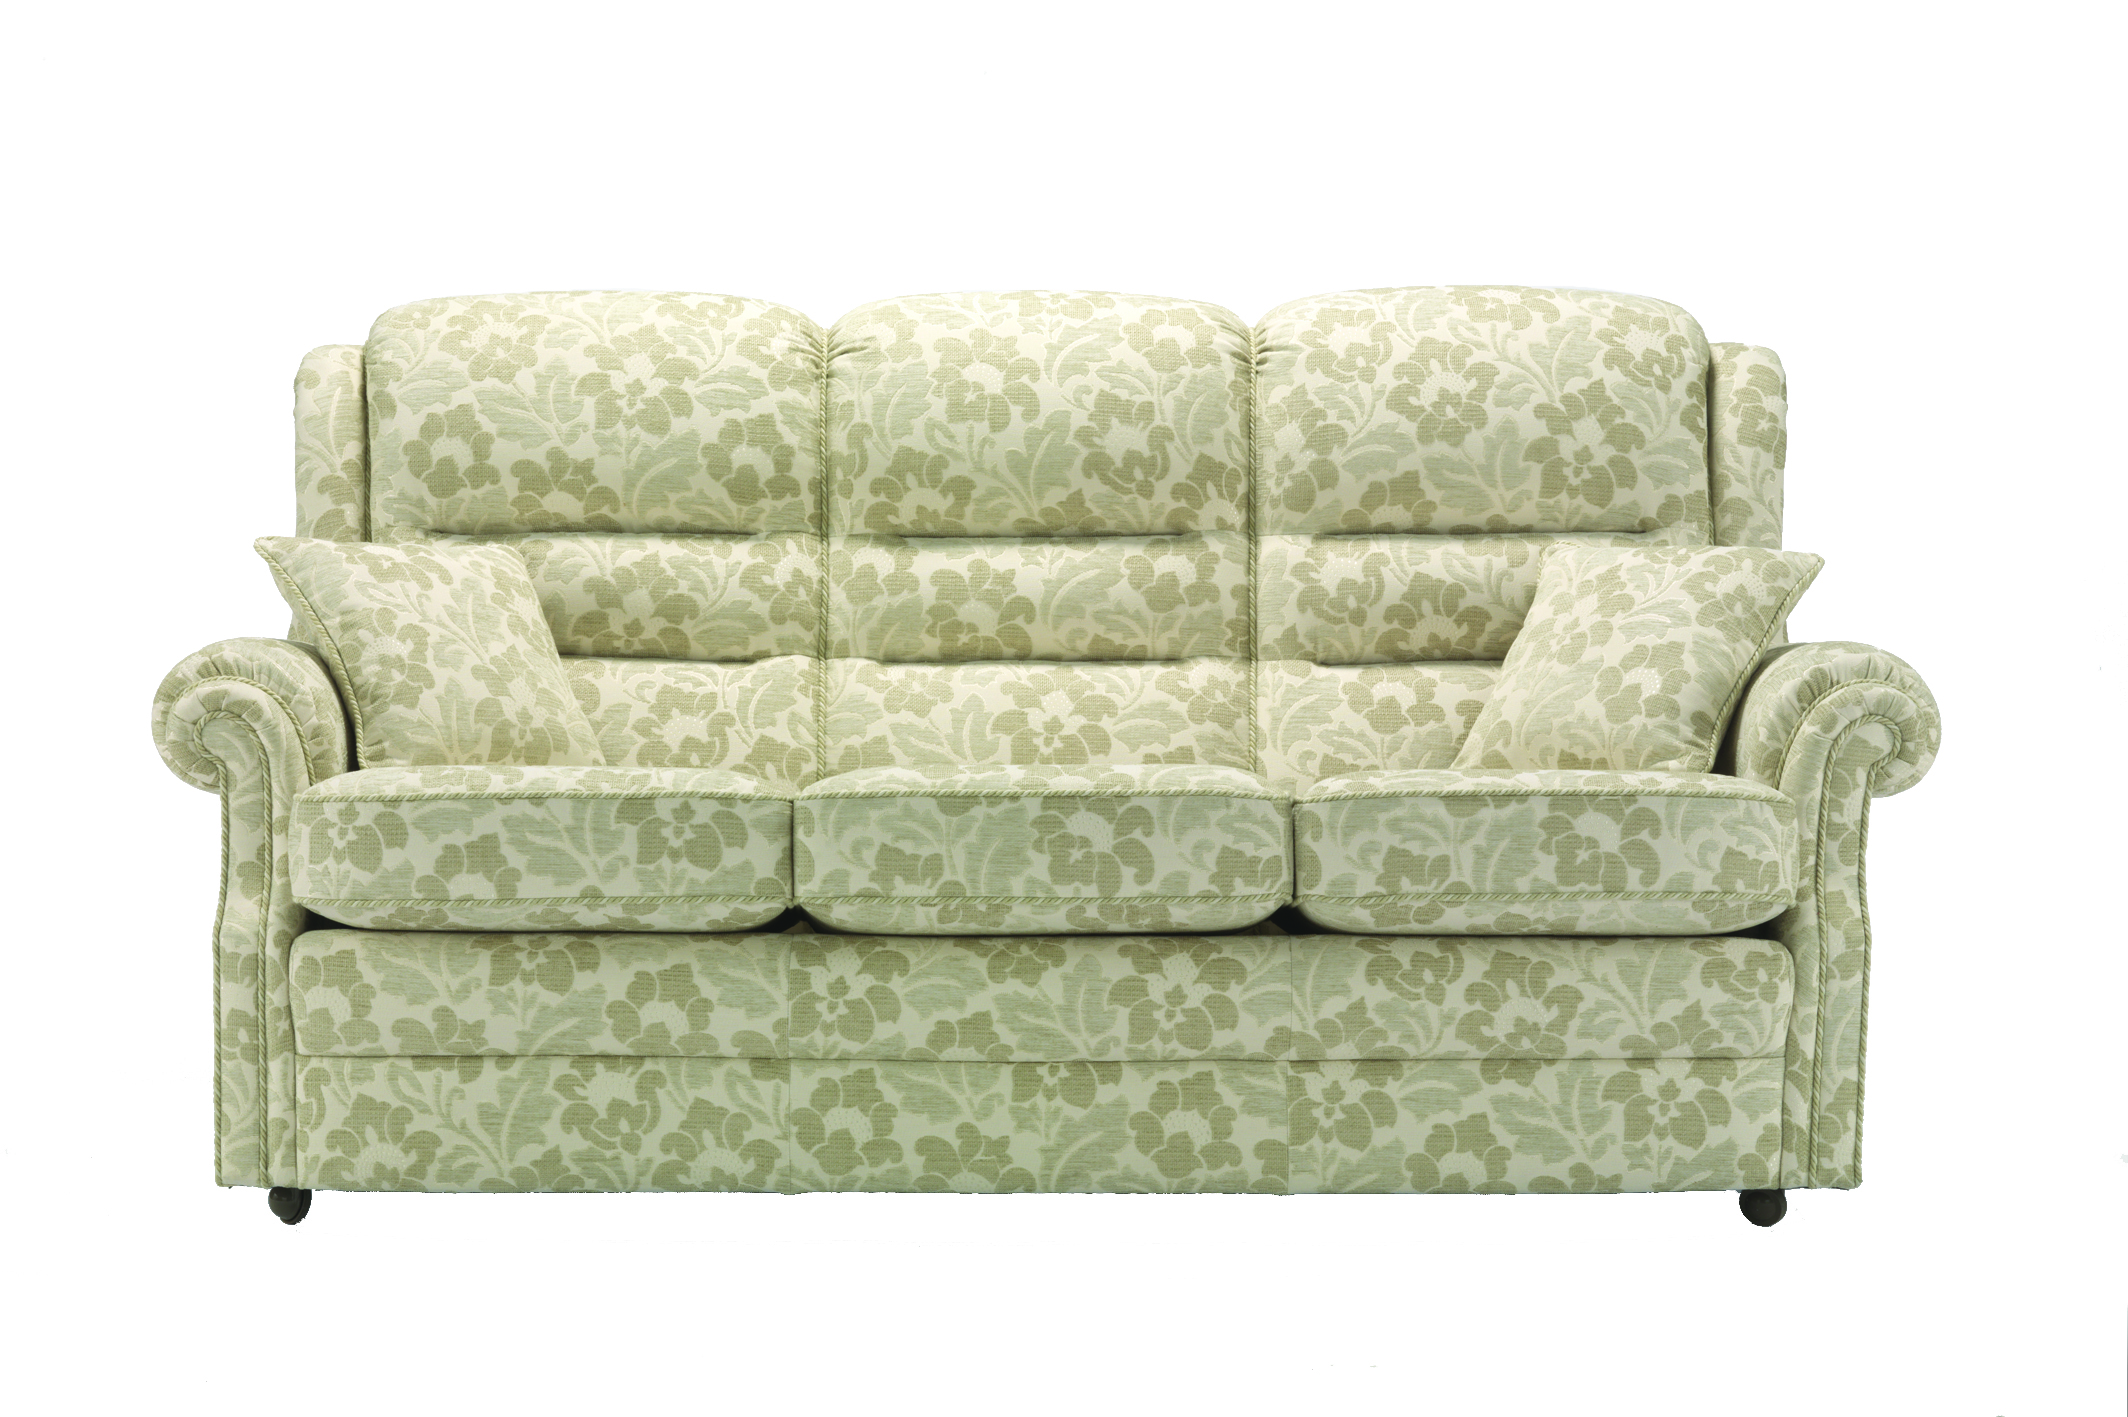 VALE LINCOLN 3 SEATER SOFA